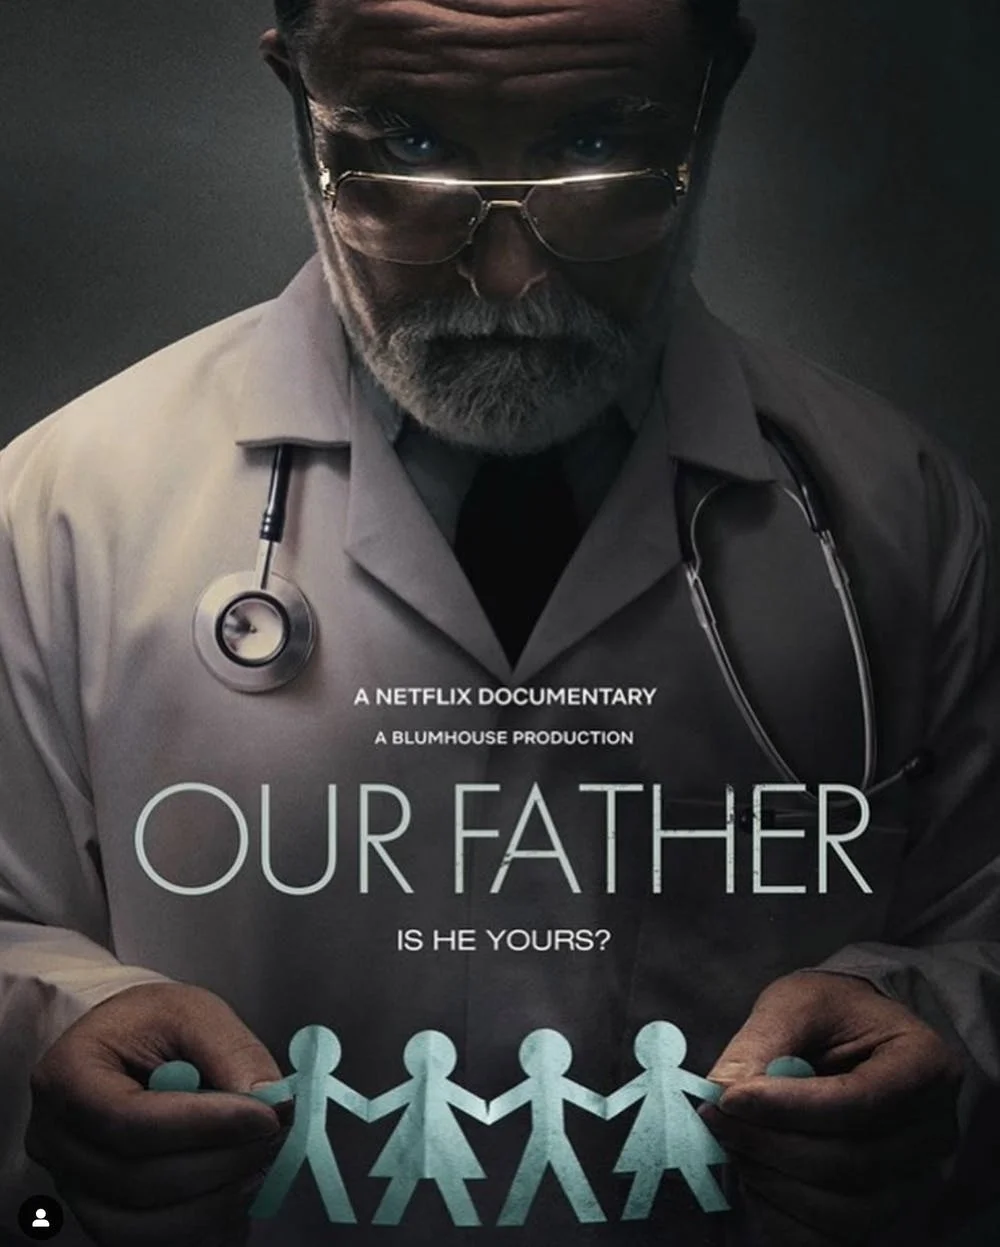 "Our Father" Review: 92 Half-Siblings, The absurd truth that turns life upside down